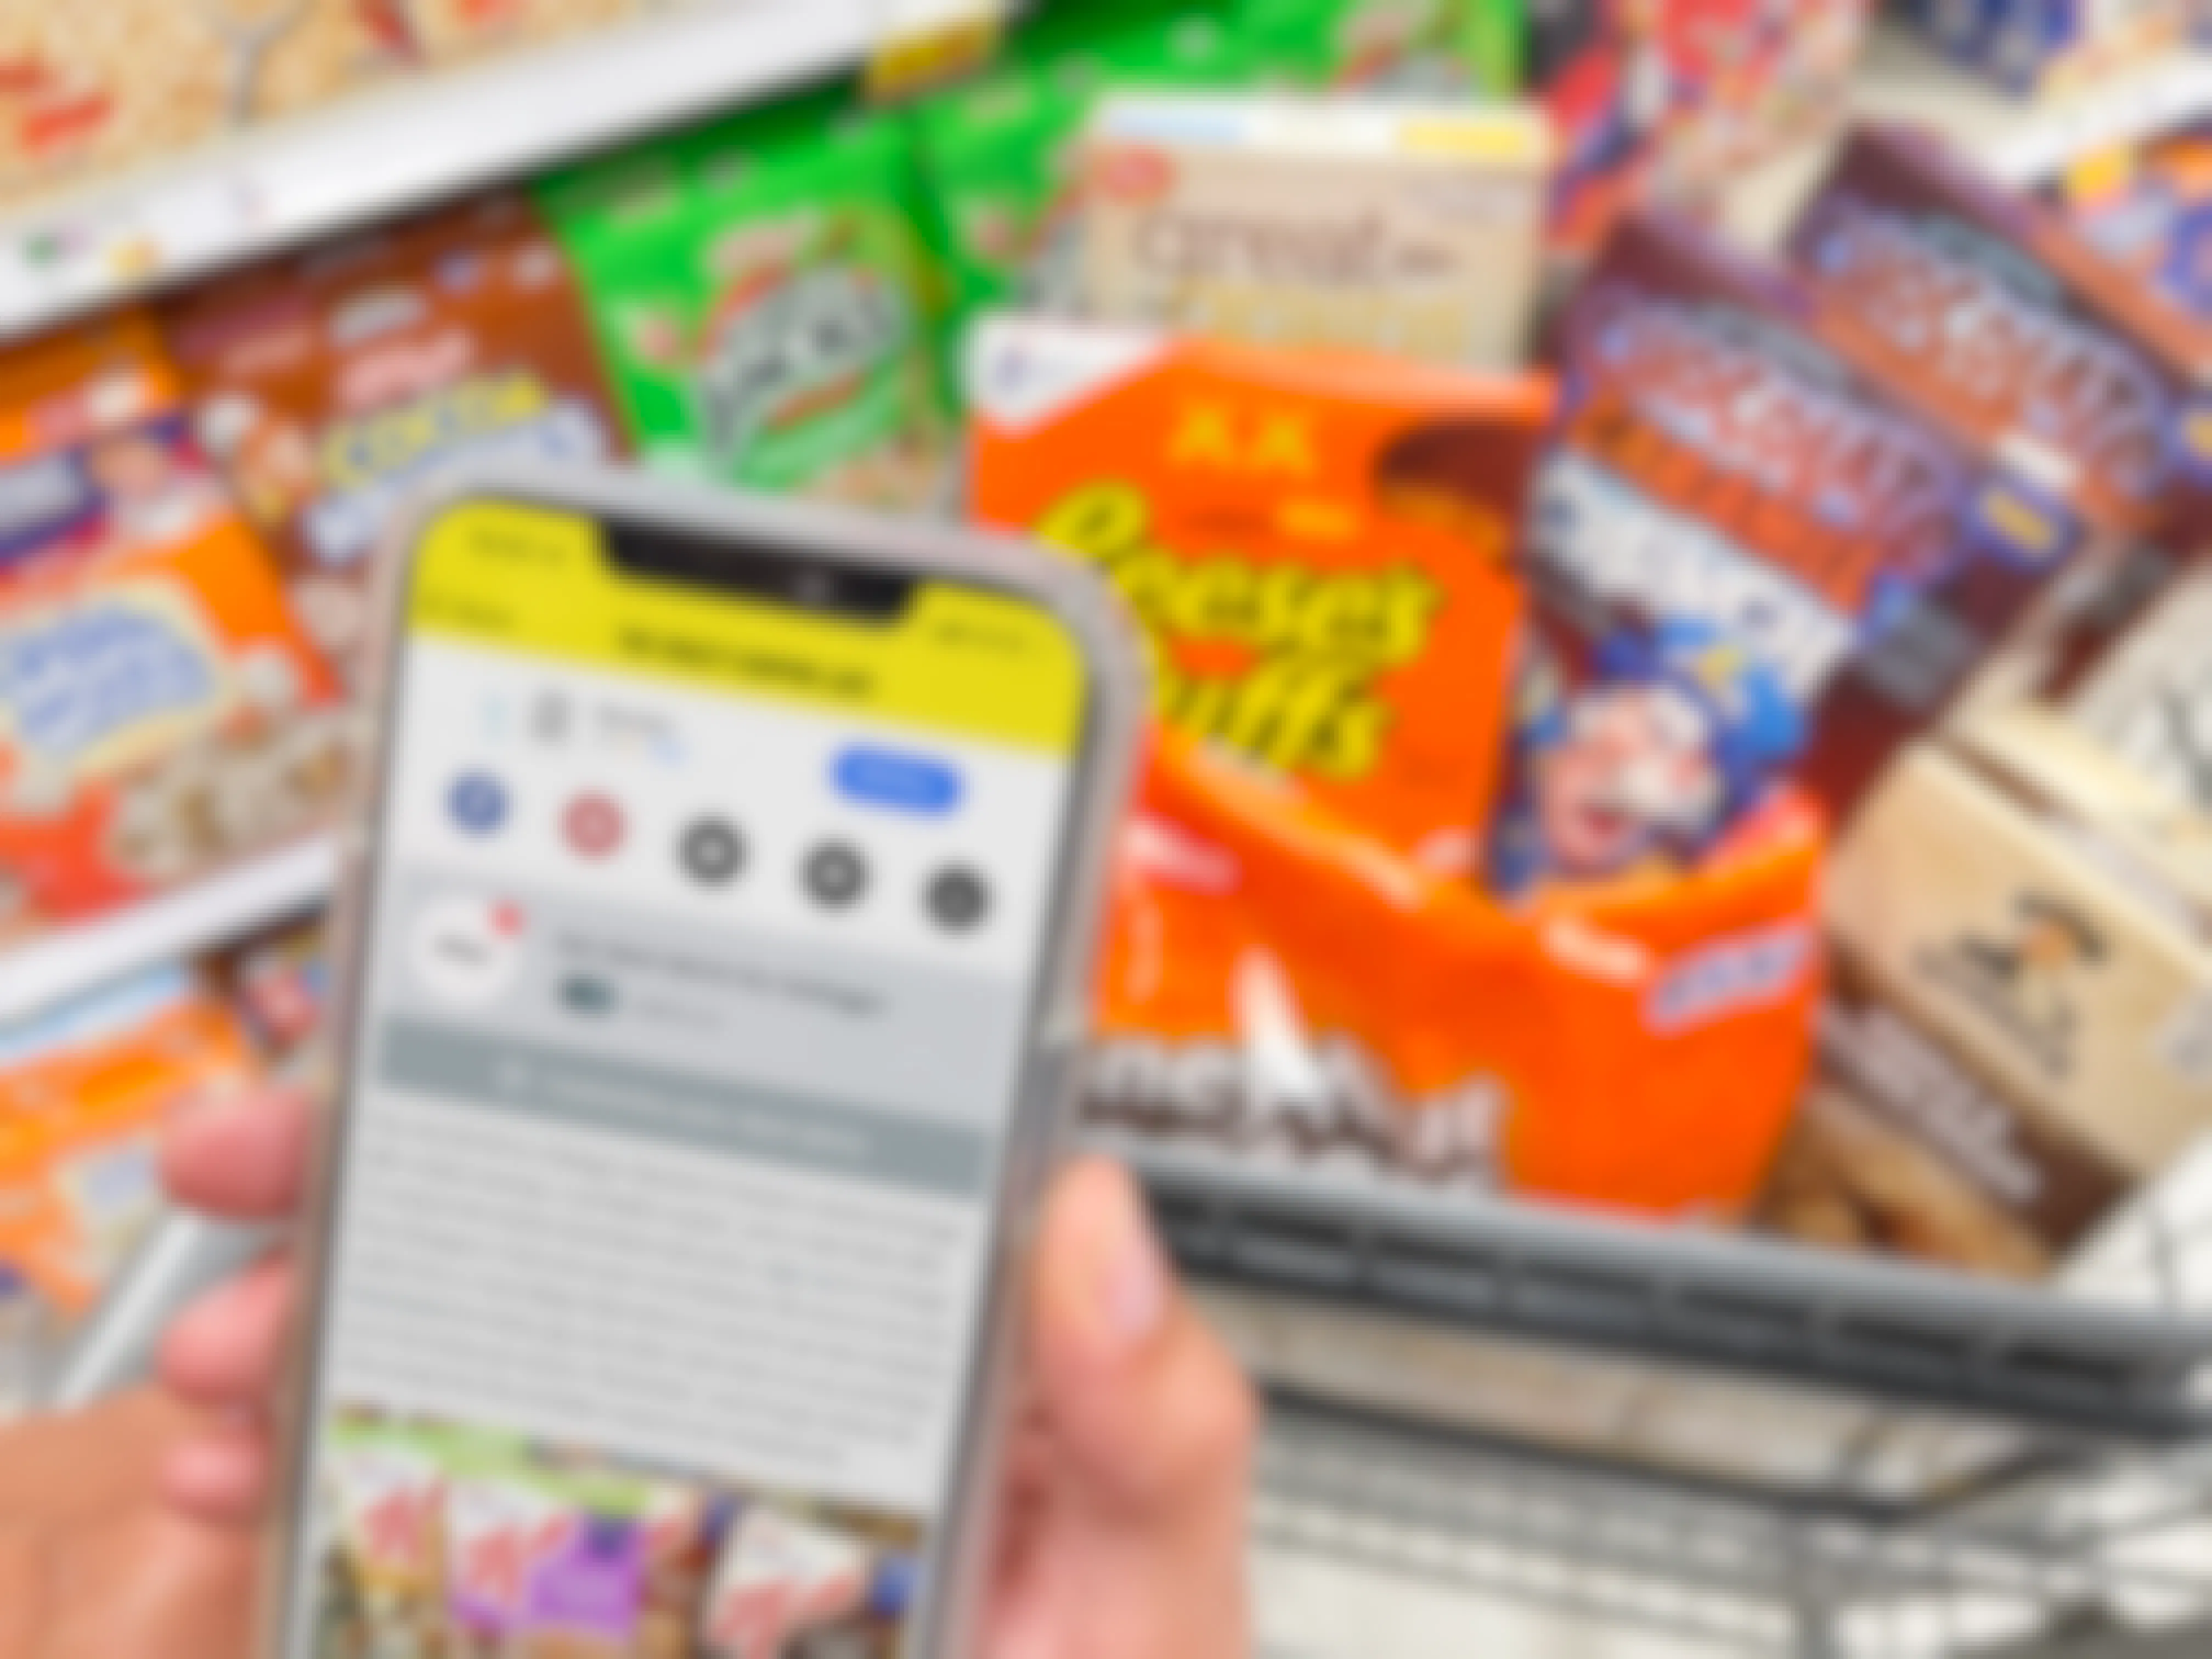 A person's hands holding a cellphone displaying the Krazy Coupon Lady mobile app's page for Kellogg's deals in front of a cart full of Kellogg's brand cereal.